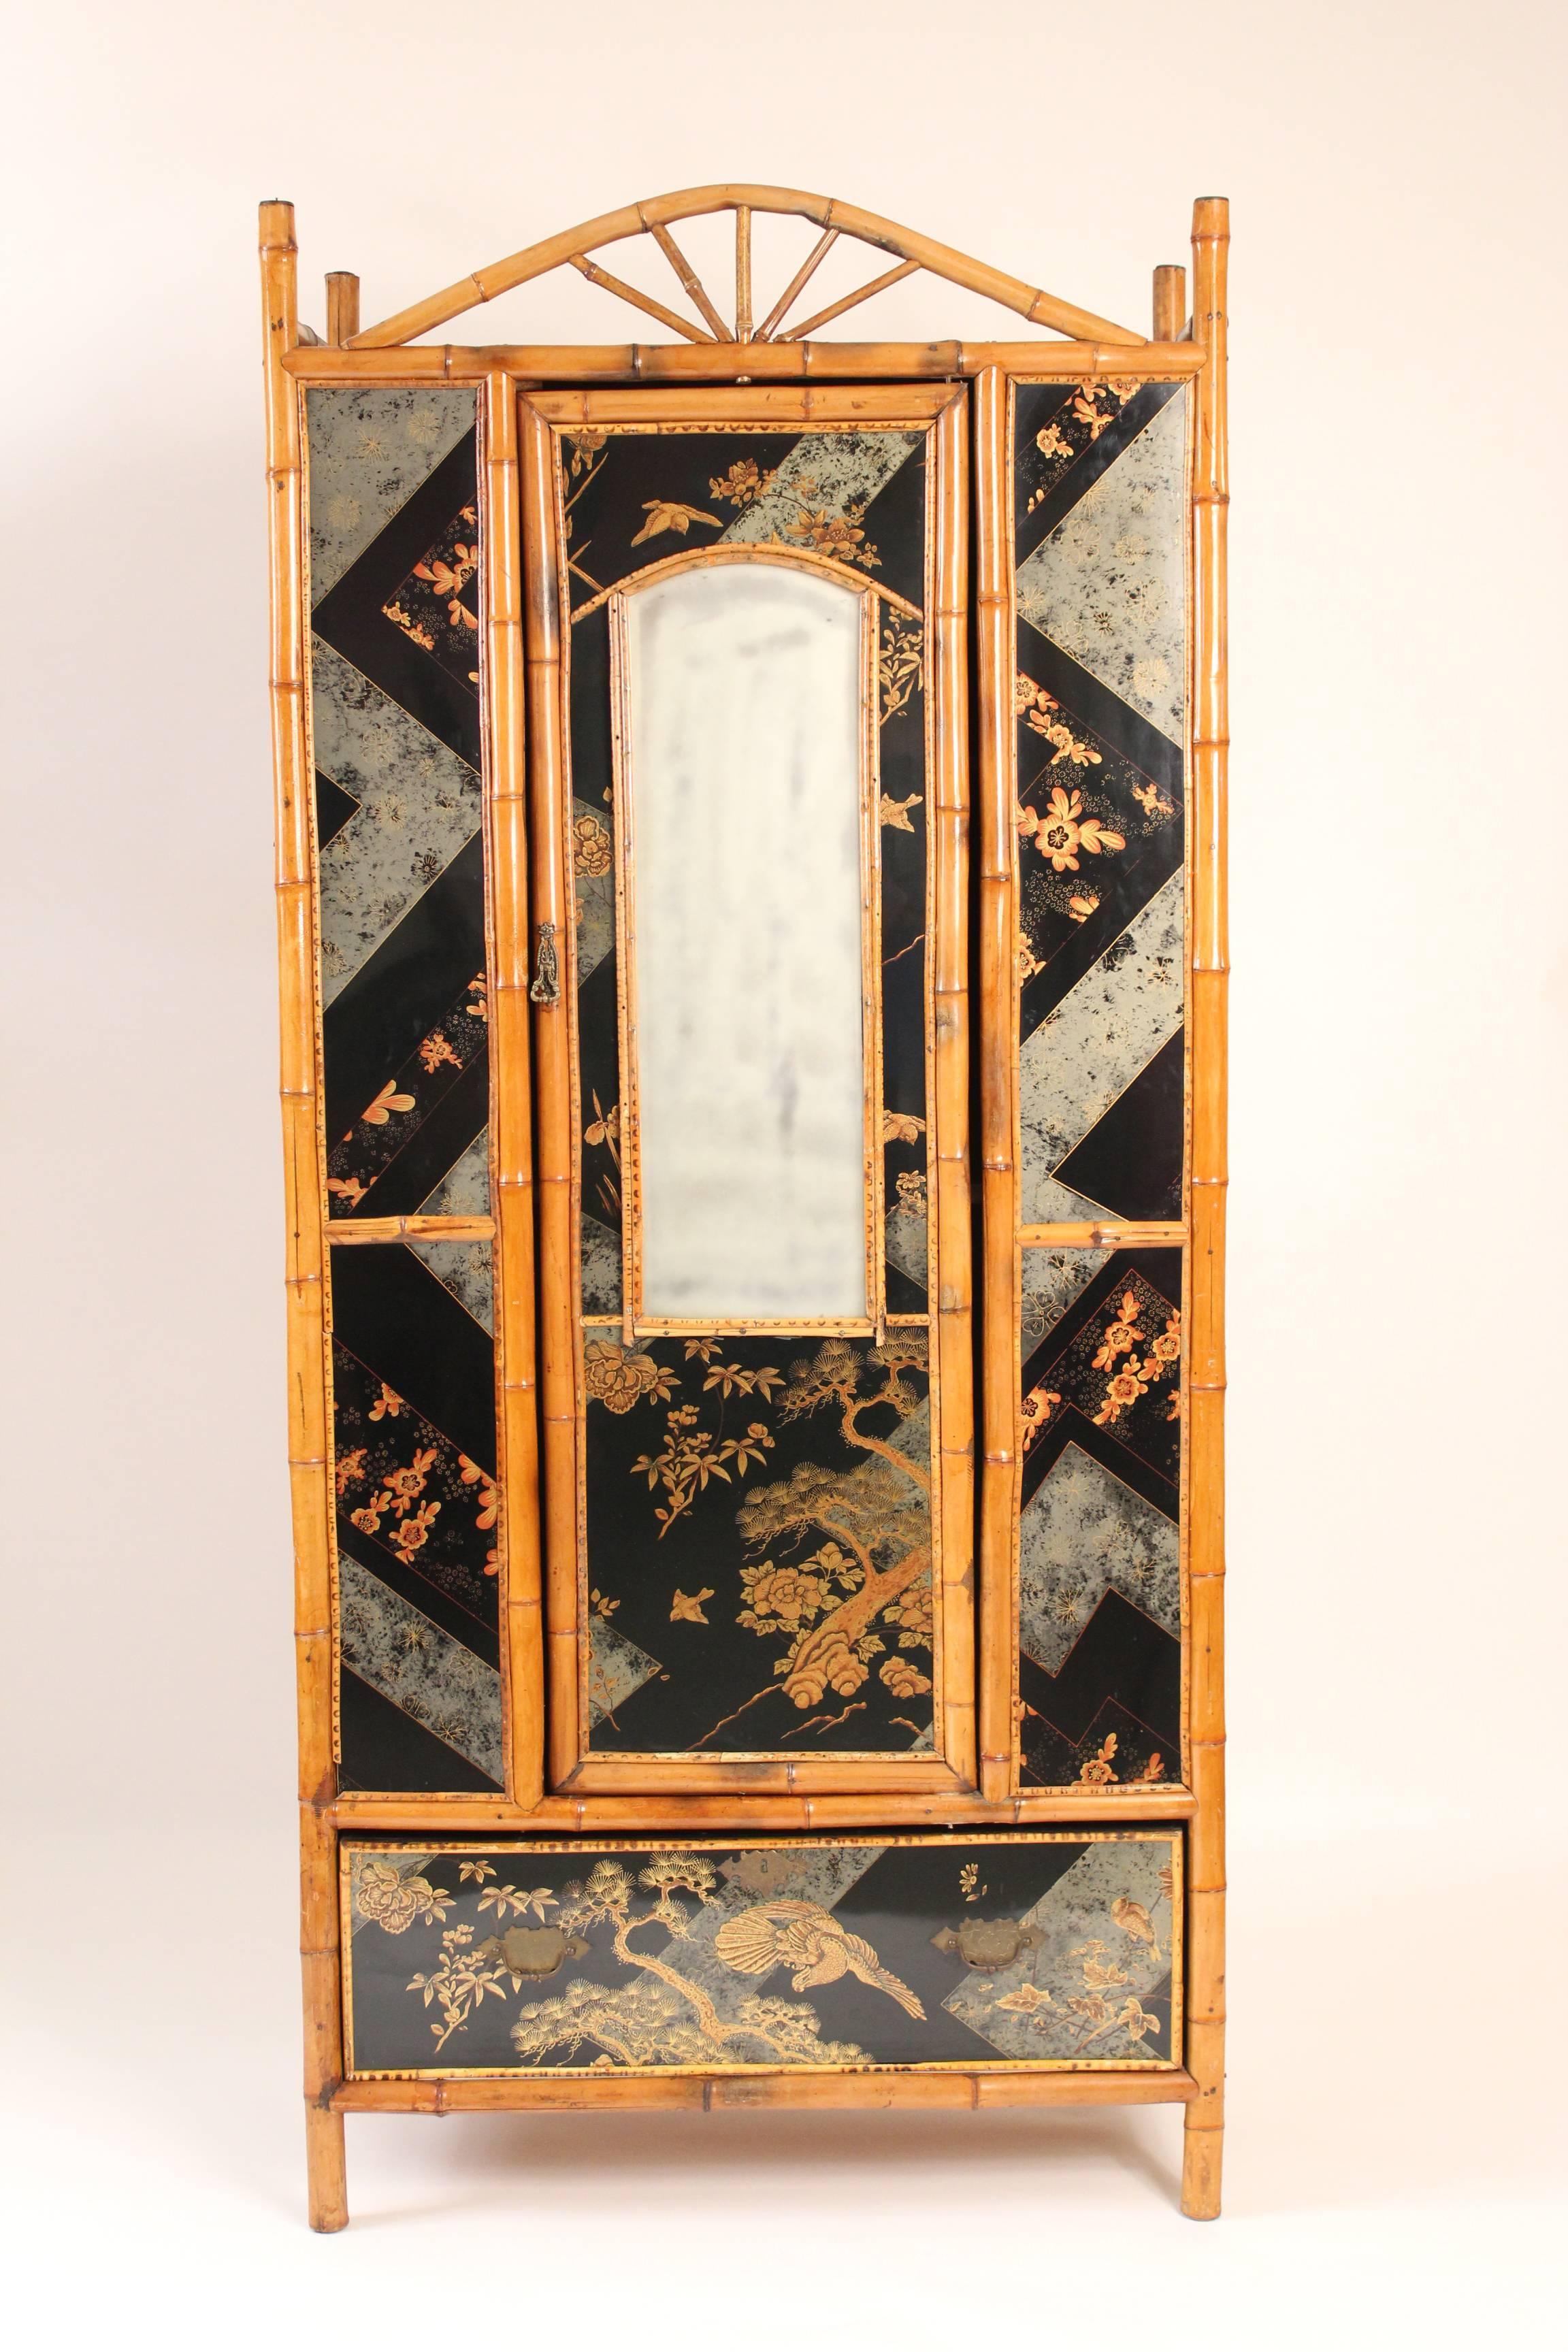 Chinoiserie decorated and bamboo armoire, circa 1930. This armoire has raised decorations and a high gloss finish.